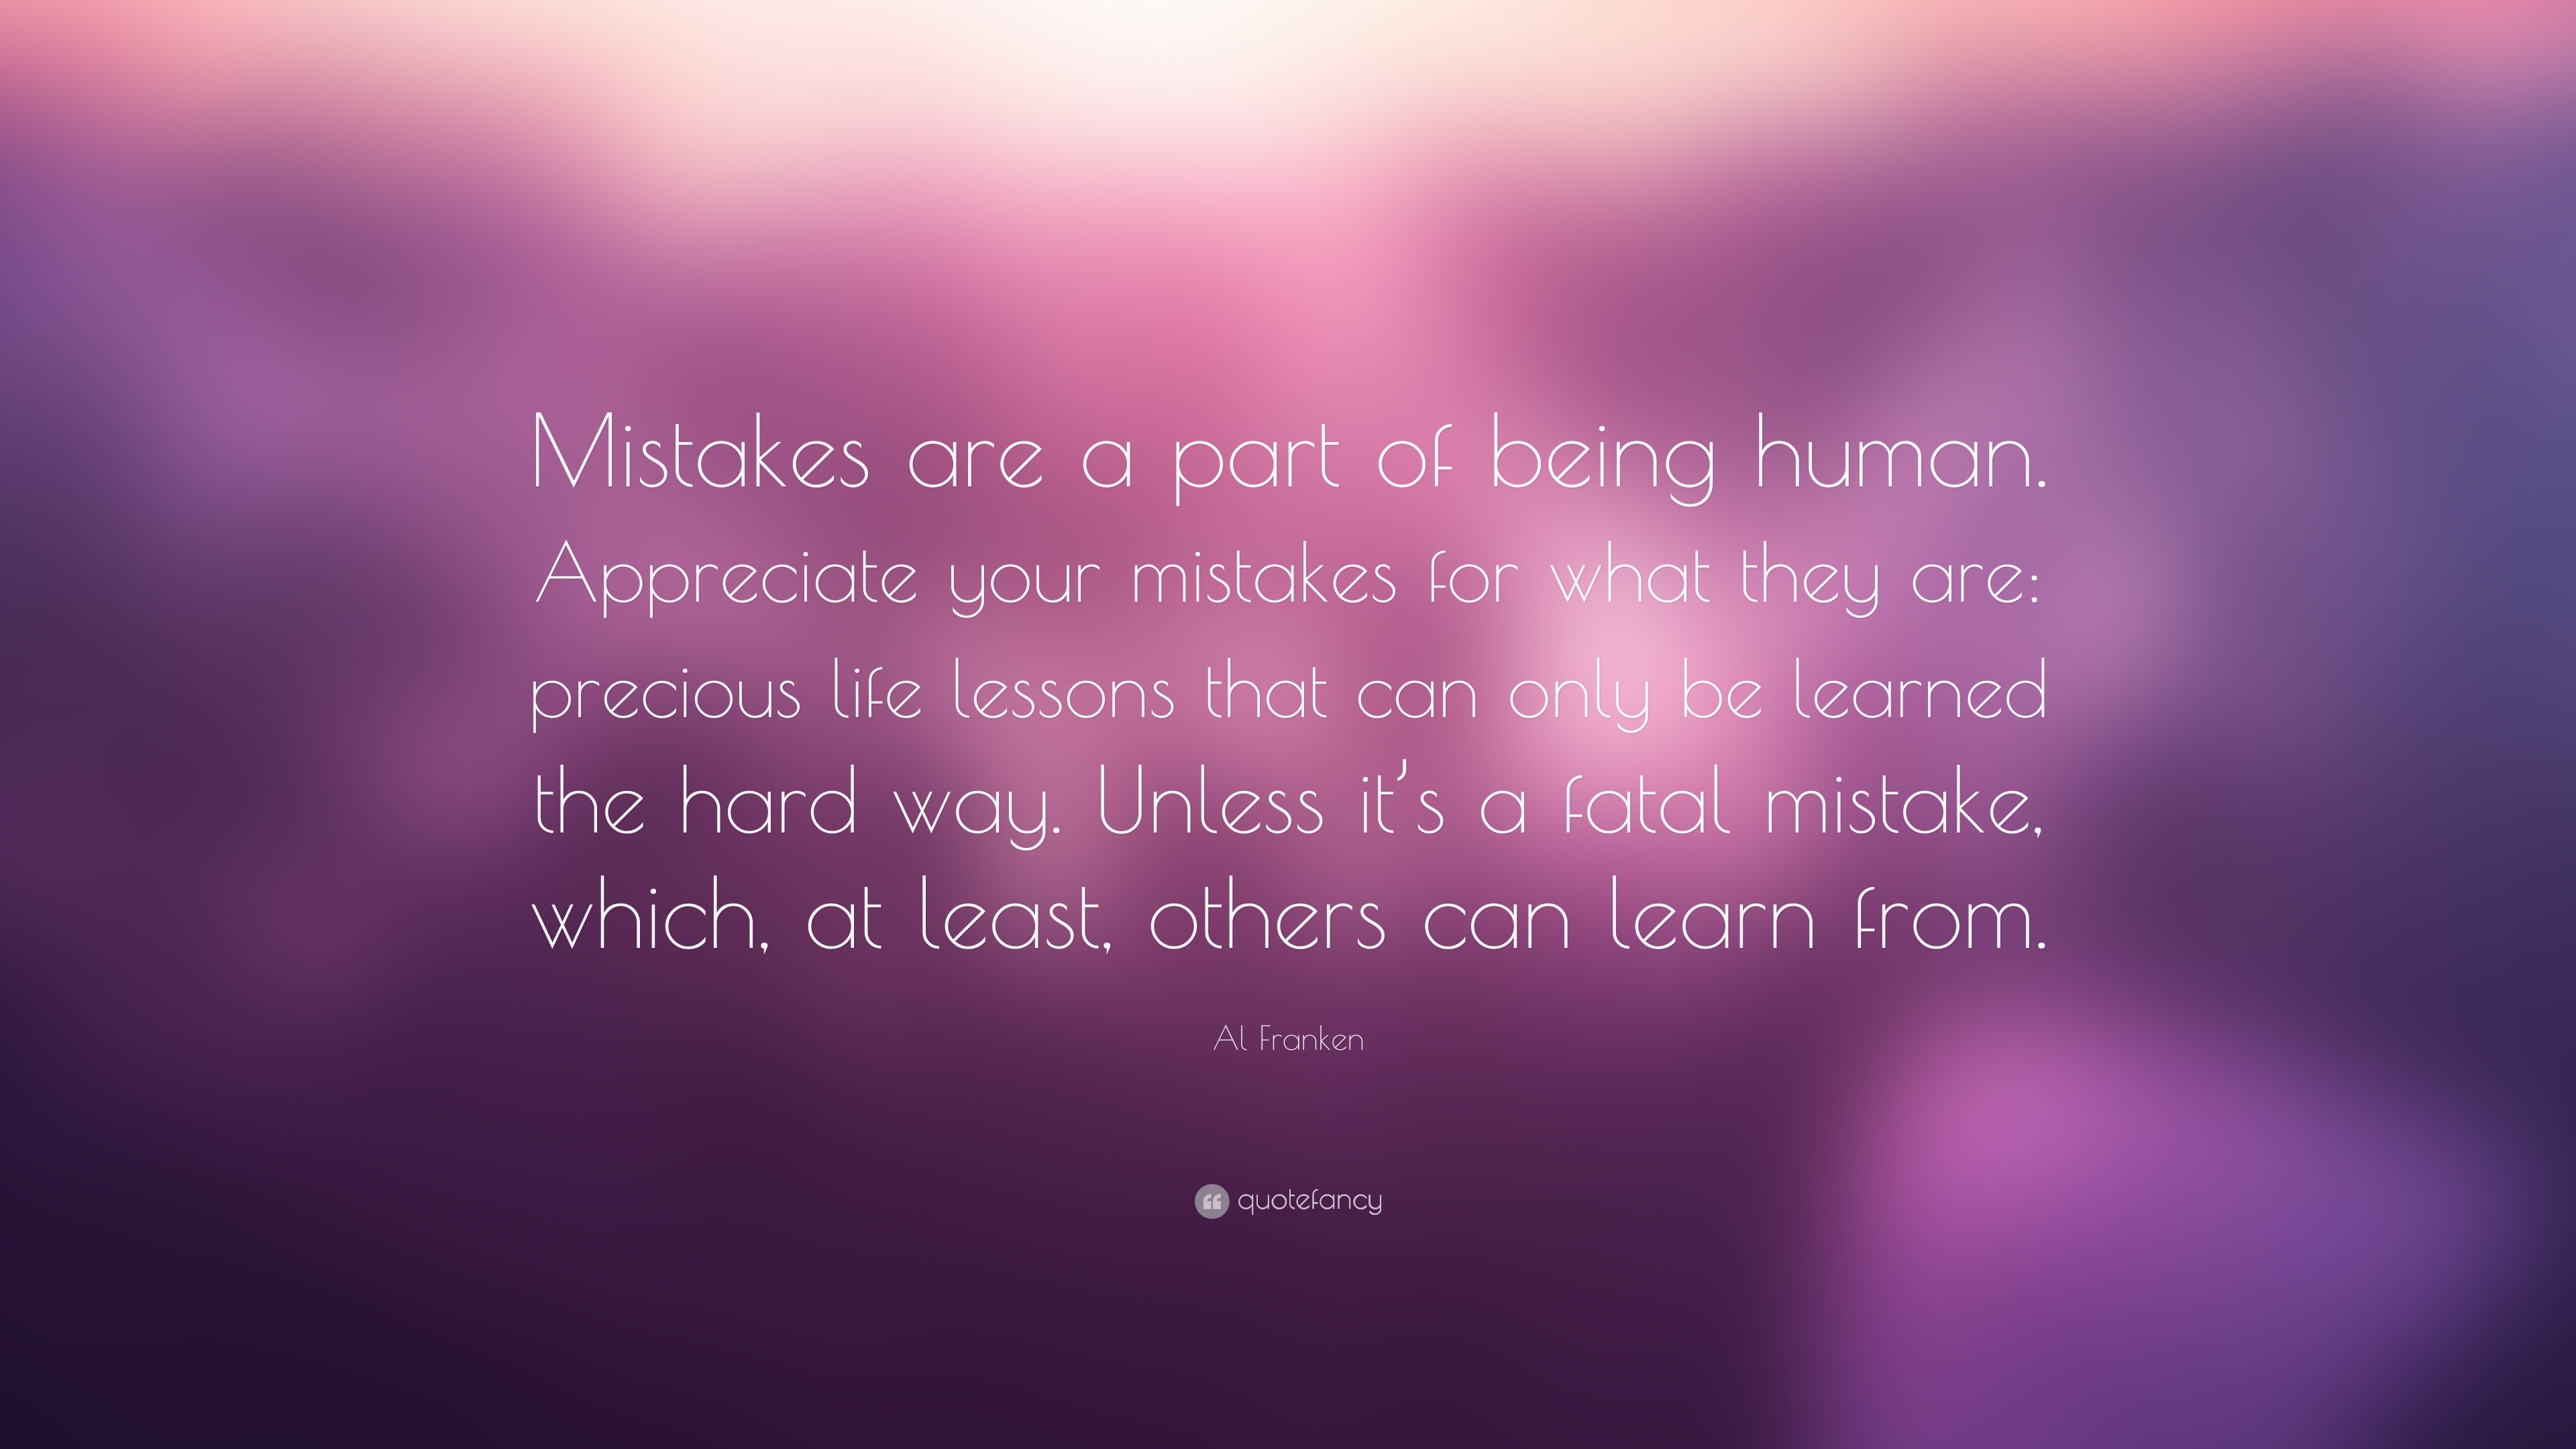 Al Franken quote: Mistakes are a part of being human. Appreciate